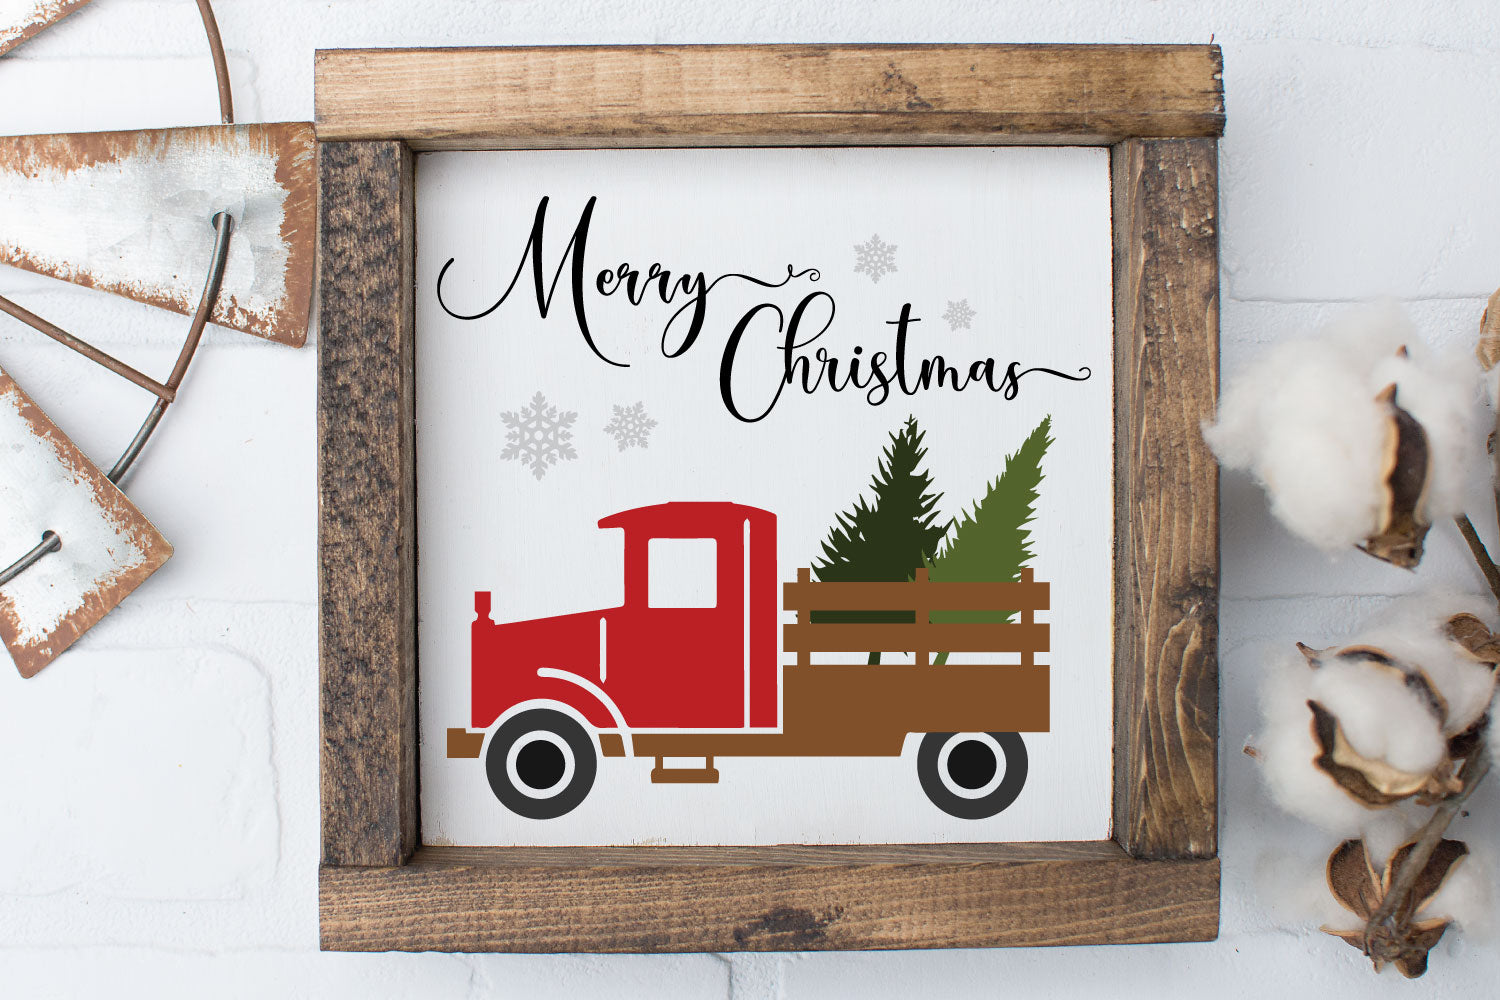 Red Vintage Christmas Tree Truck